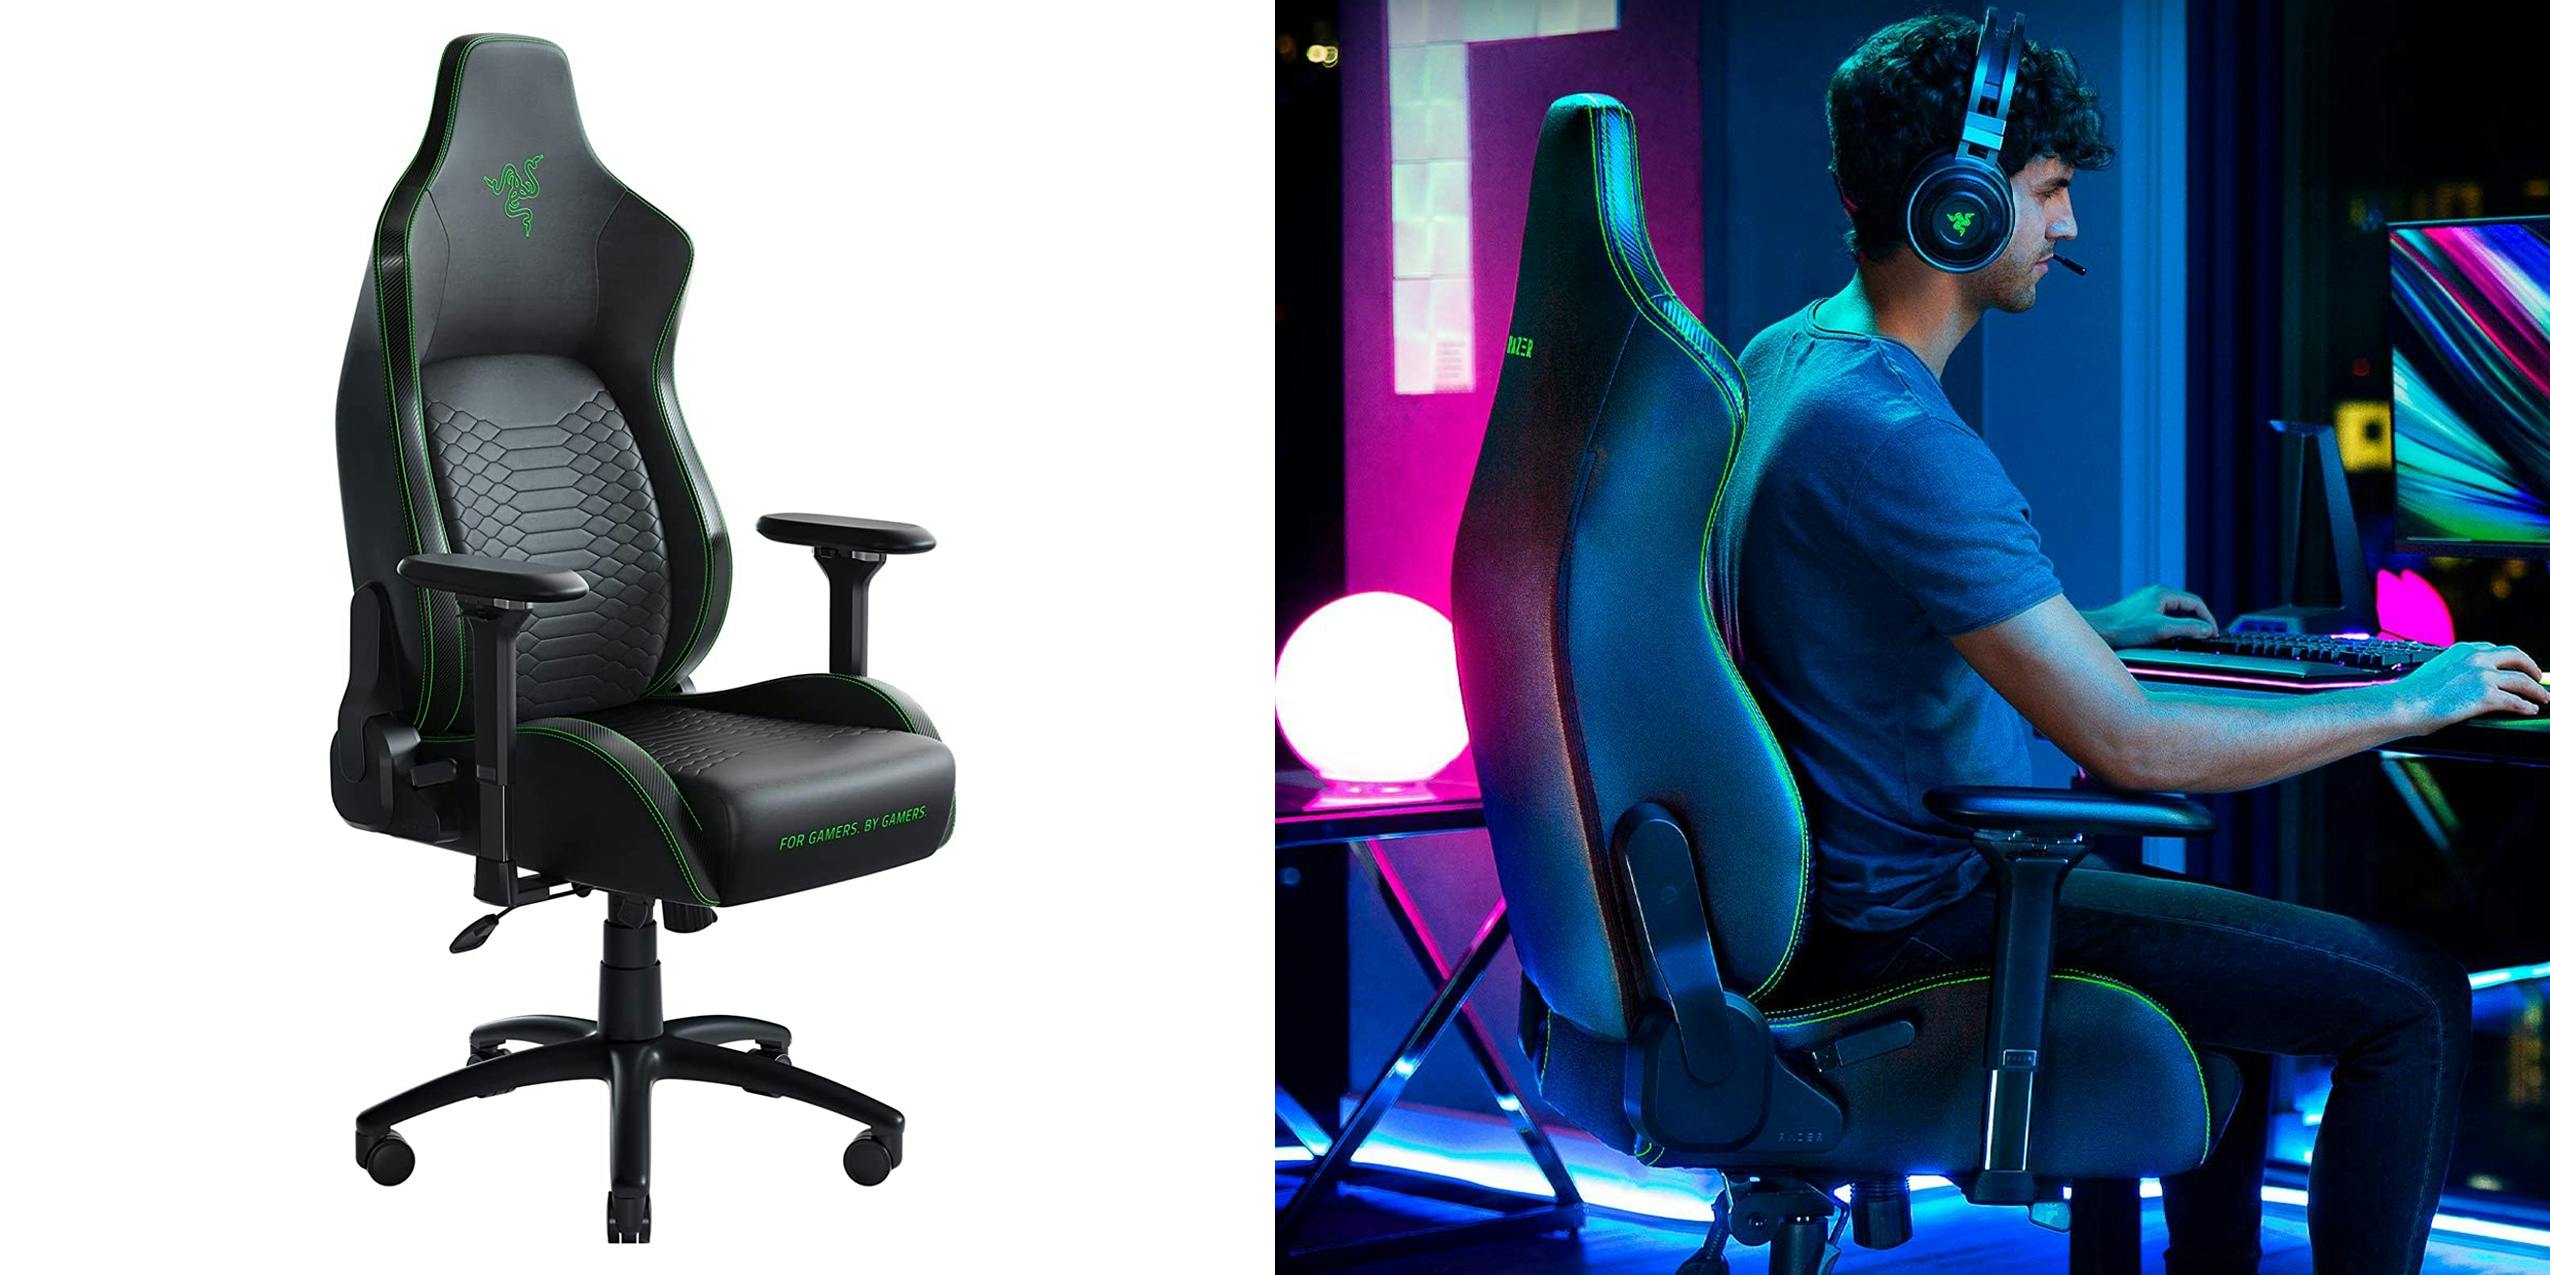 Razer Iskur gaming chair product image along with a gamer sitting in it while gaming on a PC.